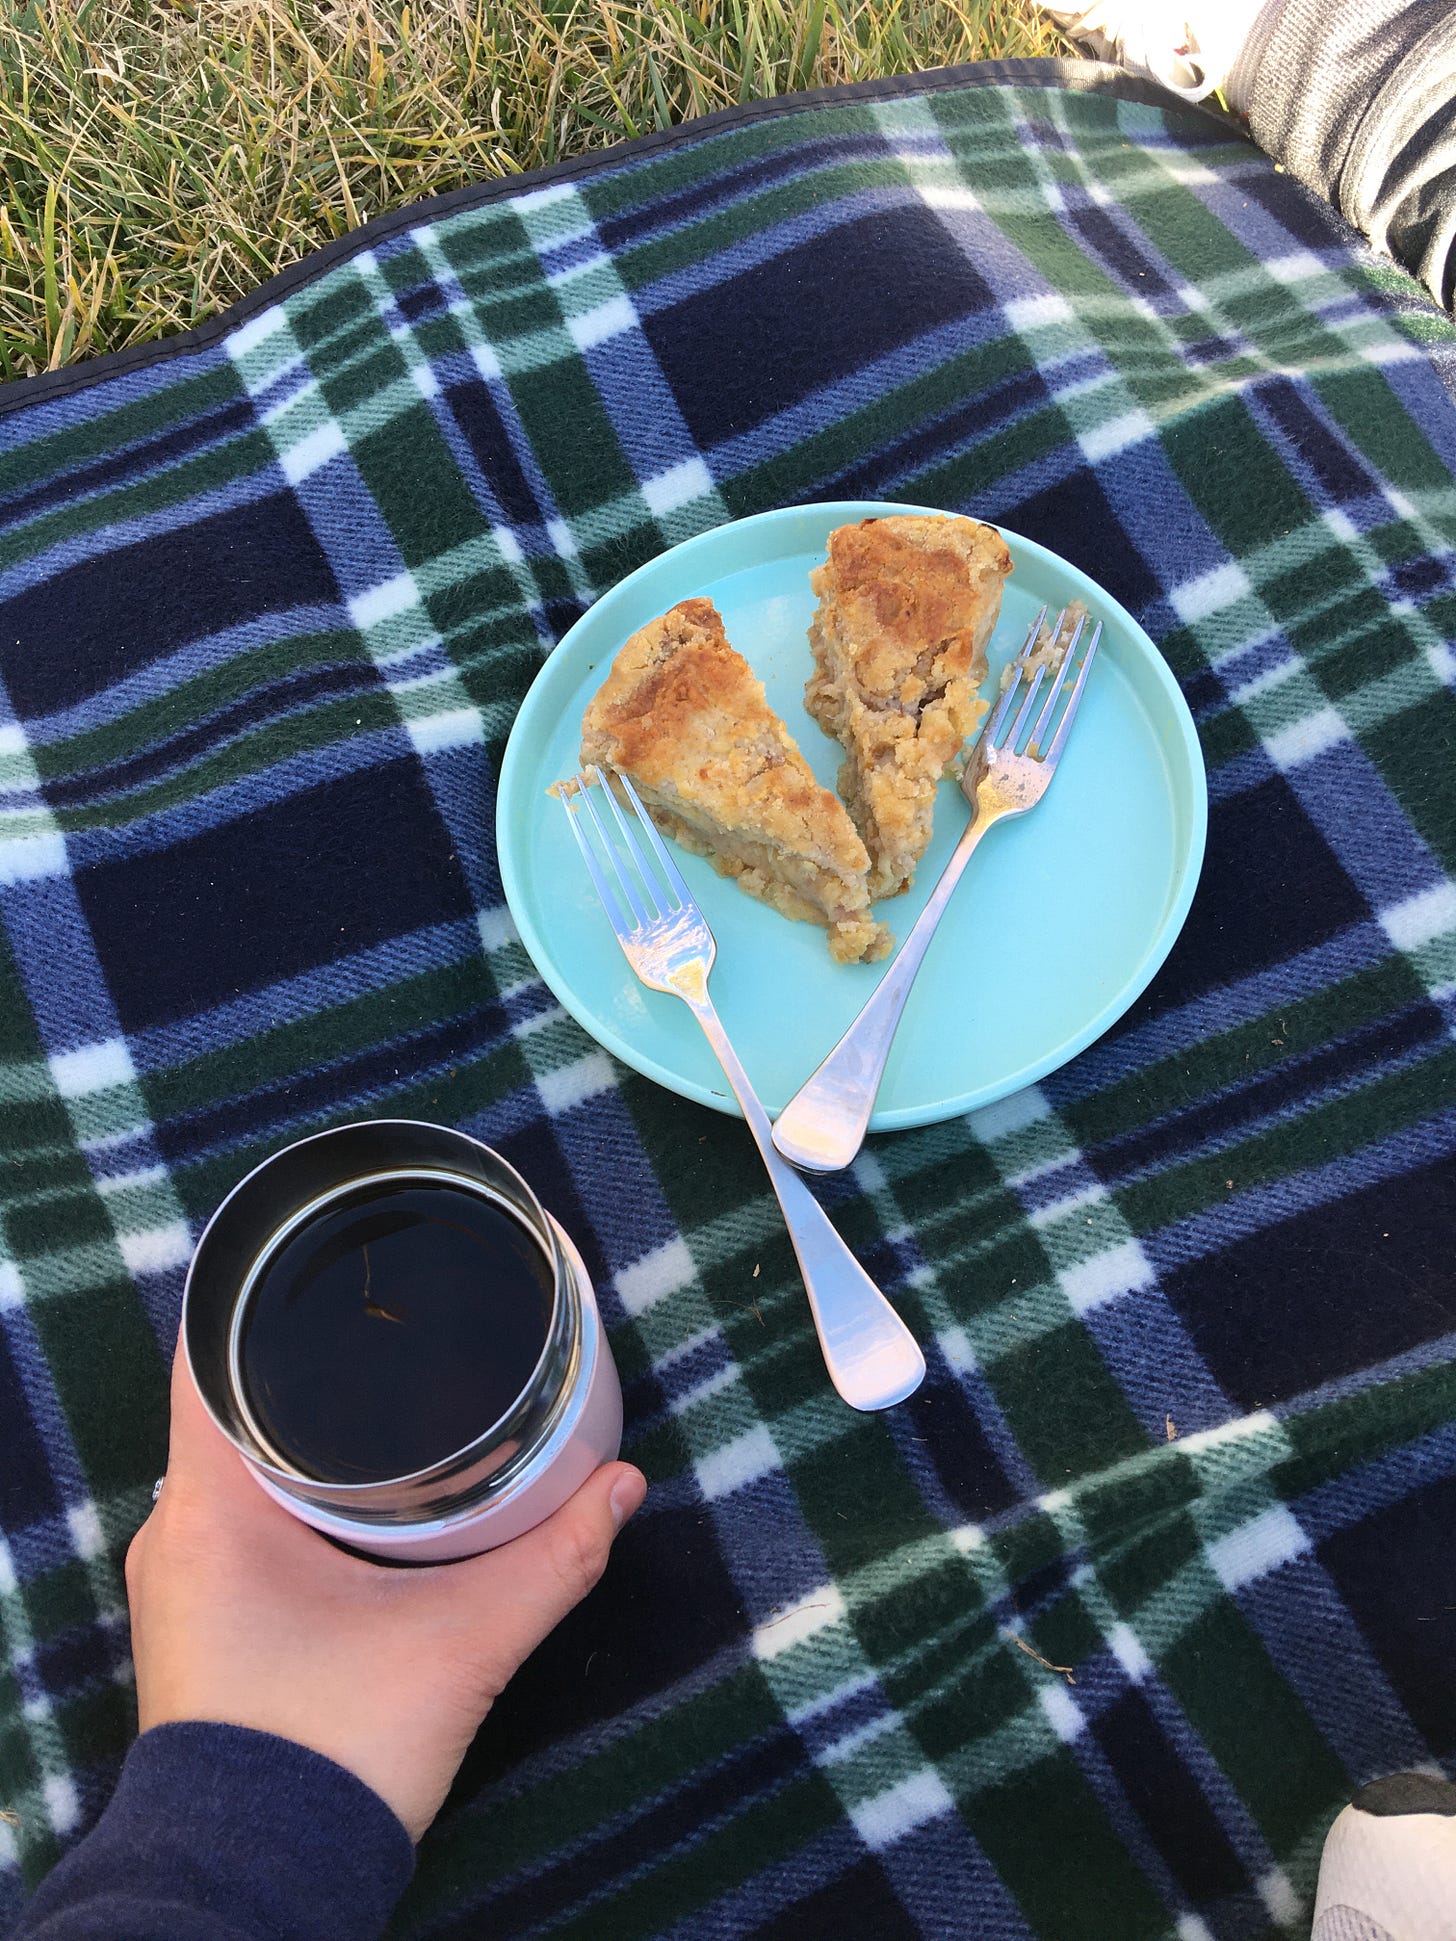 Two slices of apple crumble cake on a picnic rug with a reusable coffee cup filled with filter coffee.